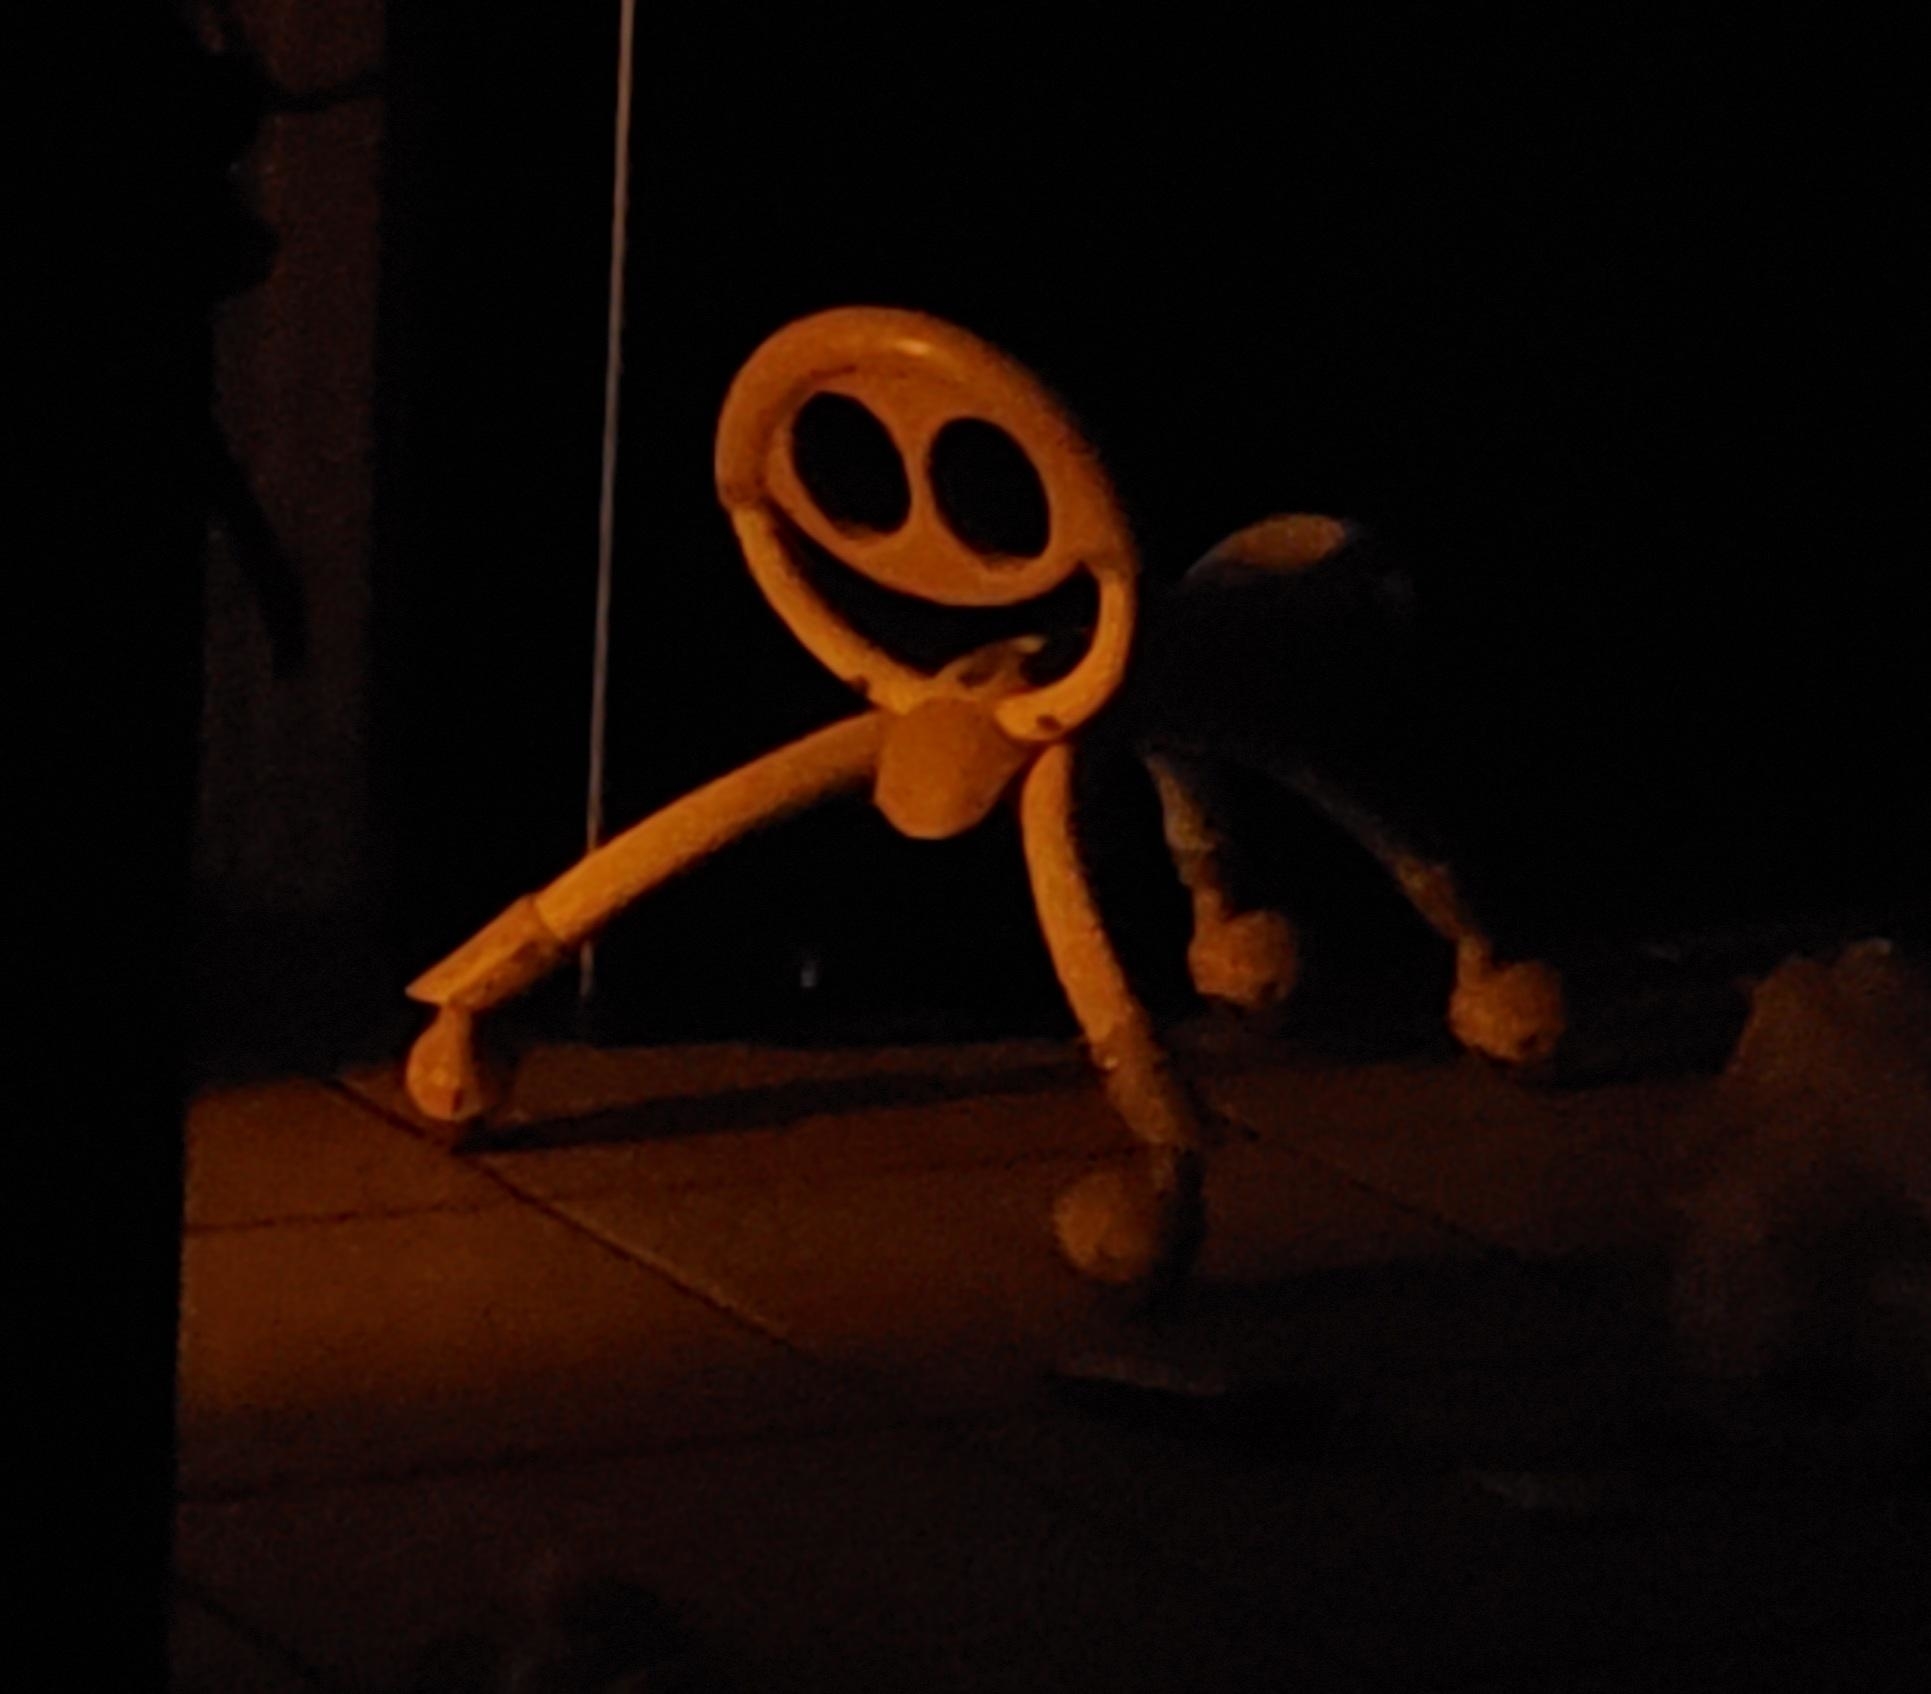 A smiley scooter in the dark